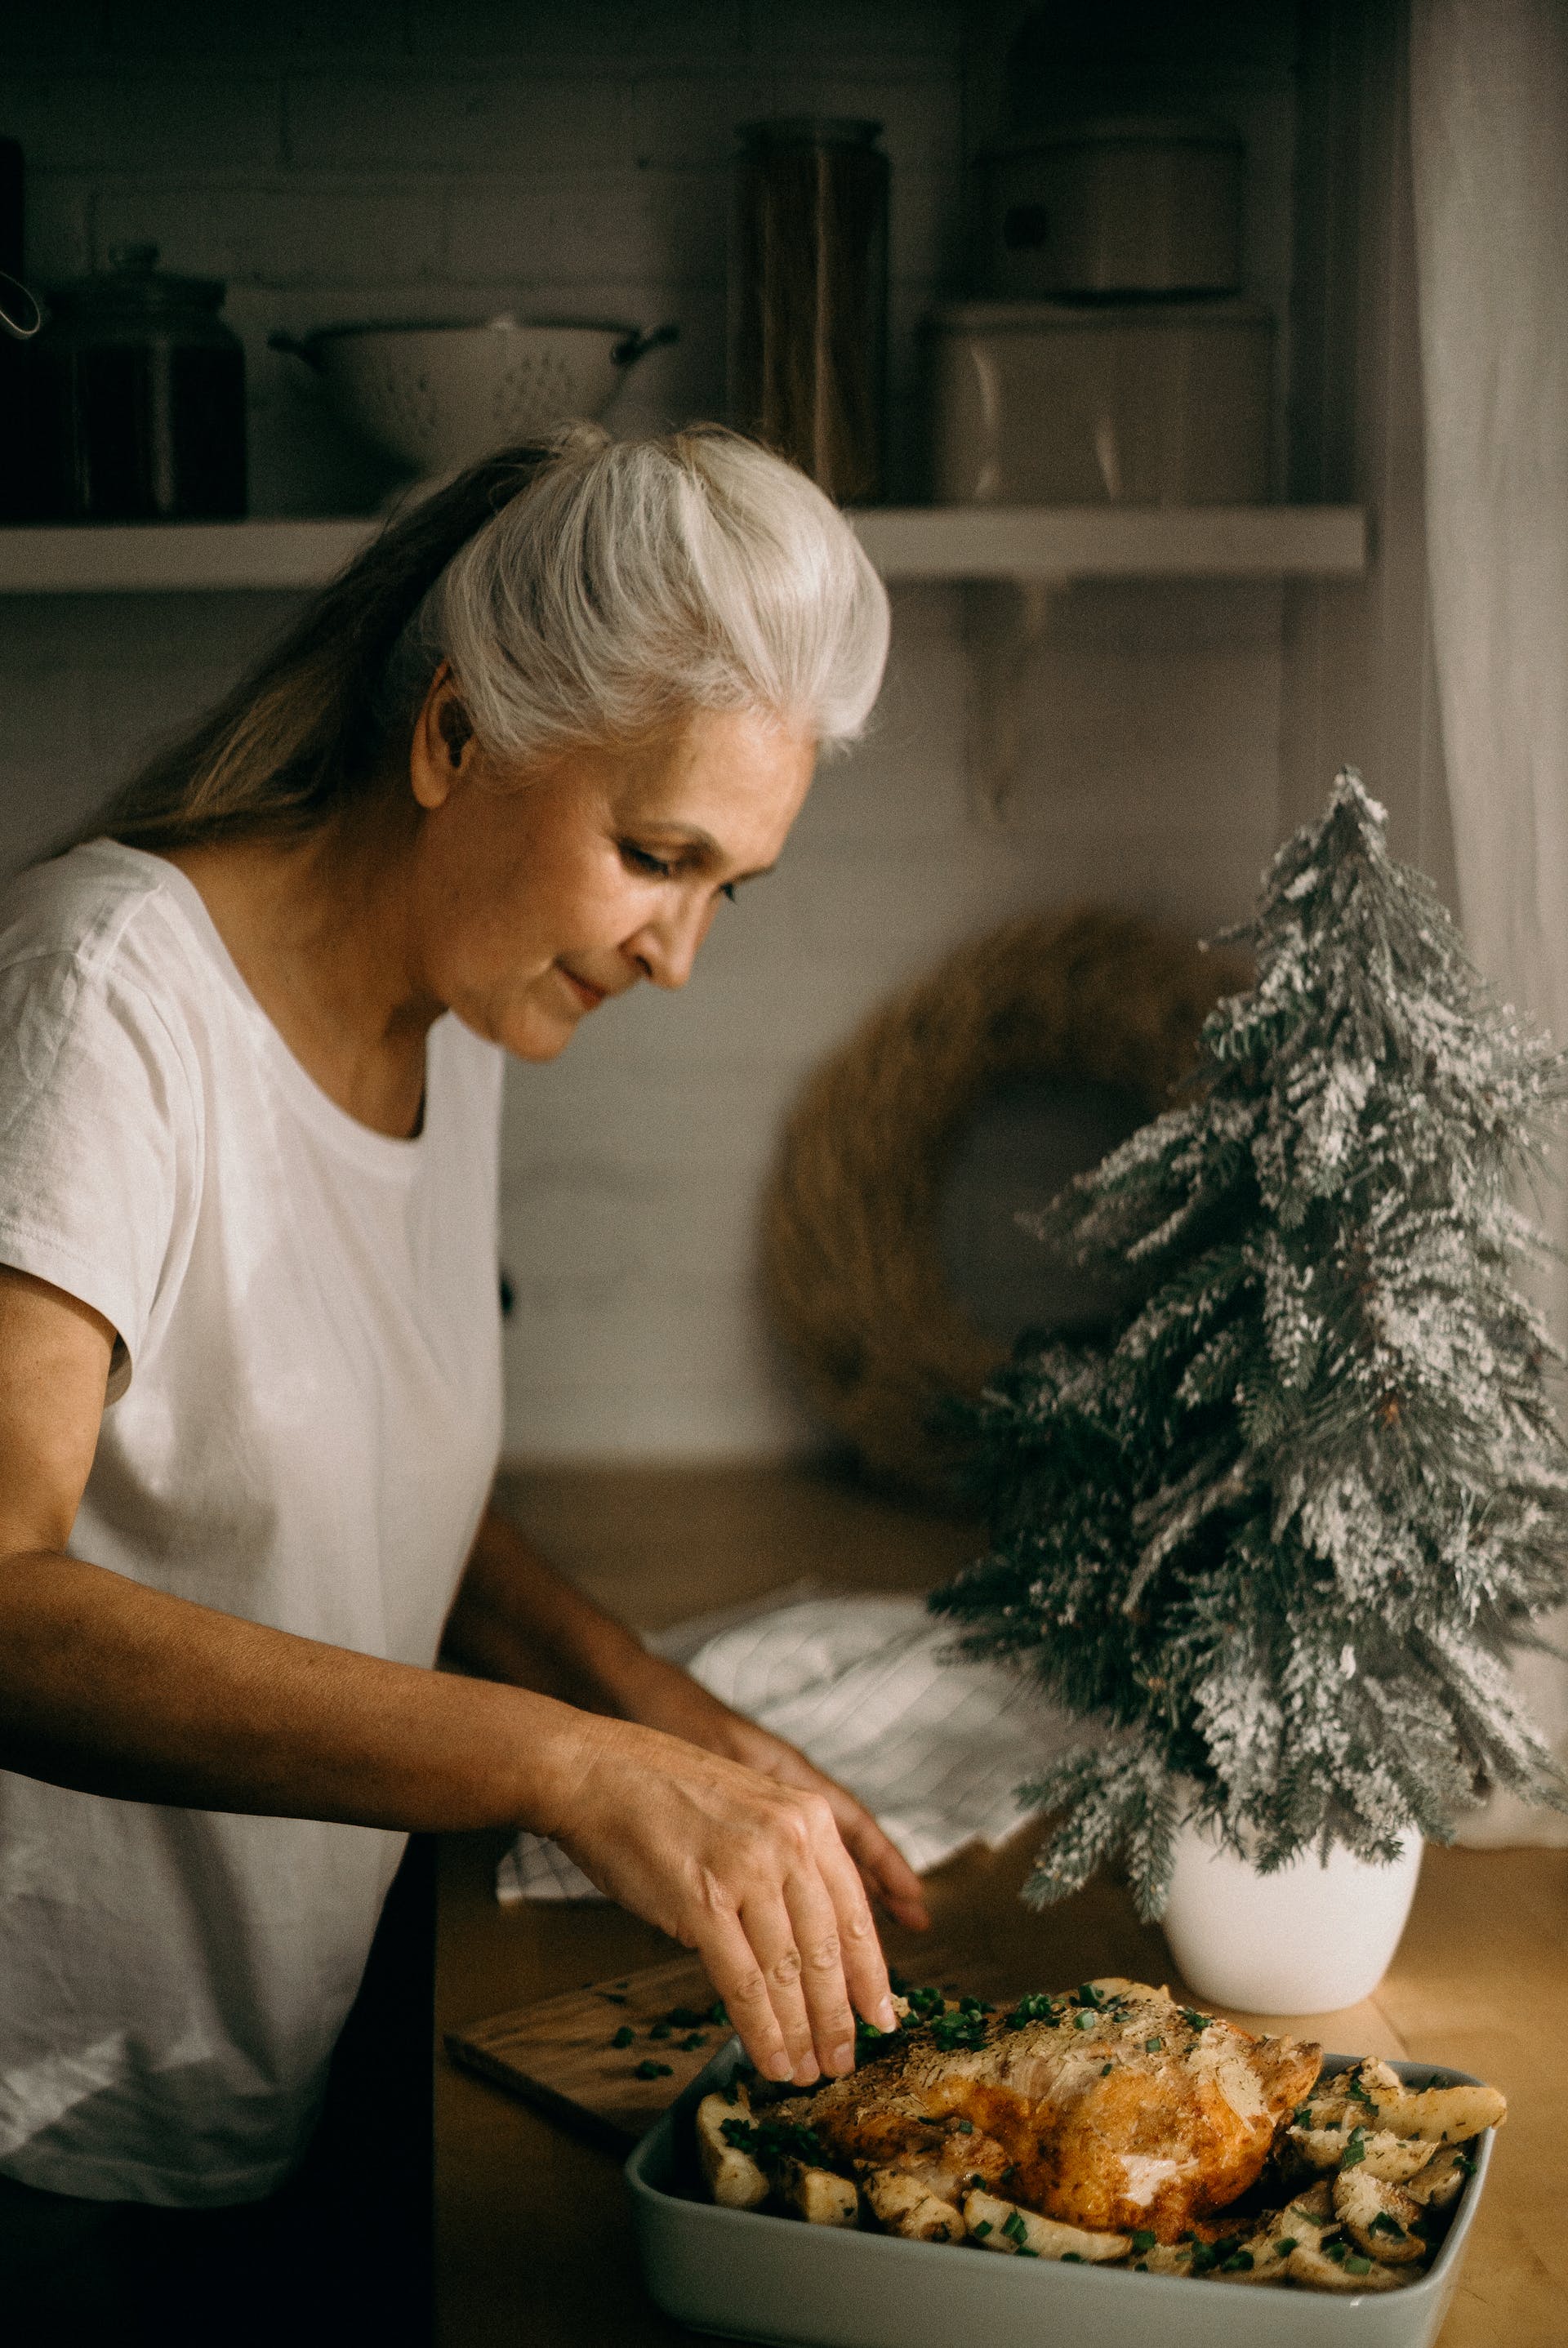 A senior woman standing in the kitchen in front of a dish | Source: Pexels